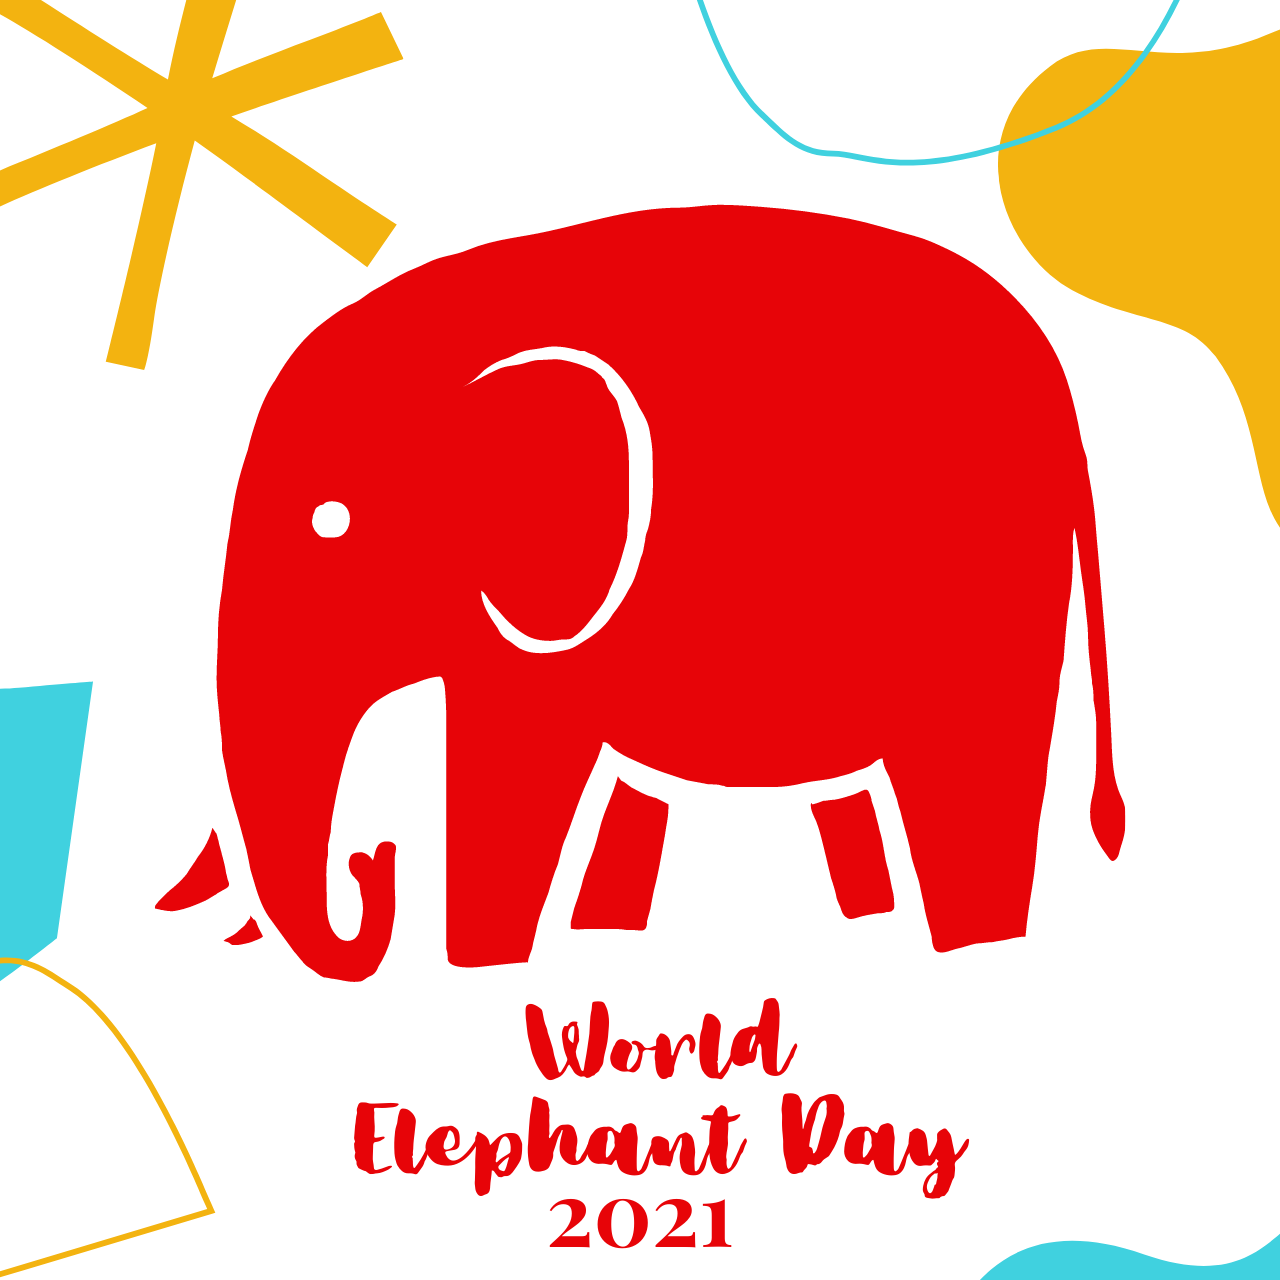 World Elephant Day 2021 Date, Theme, History, Significance, Importance Celebration, Activities, Facts, and more